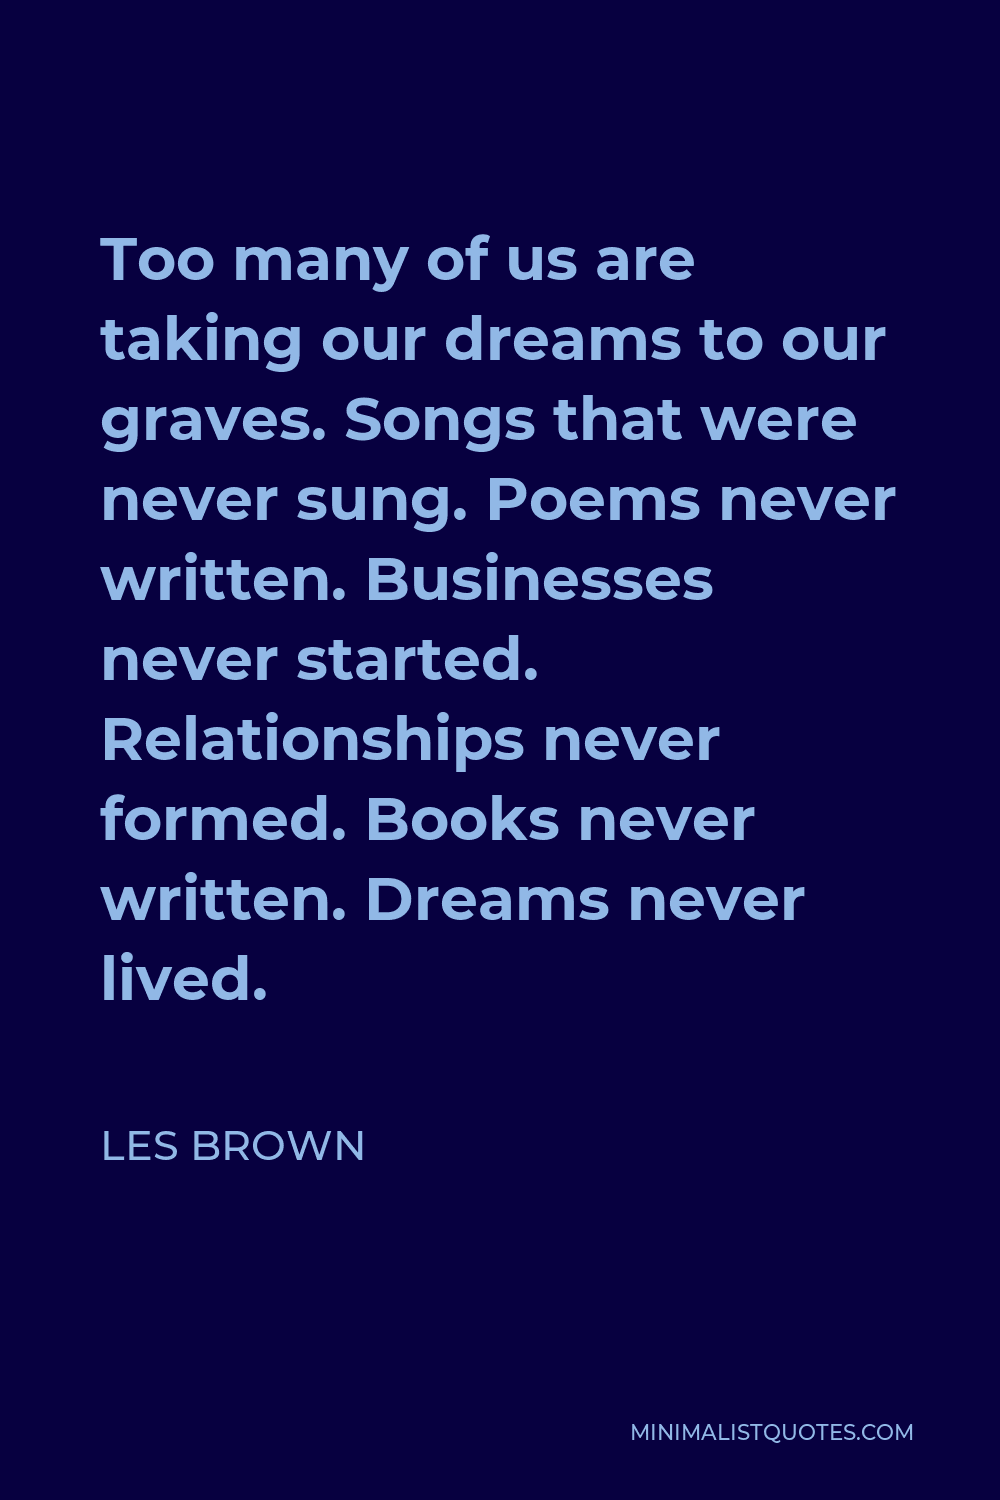 Les Brown Quote - Too many of us are taking our dreams to our graves. Songs that were never sung. Poems never written. Businesses never started. Relationships never formed. Books never written. Dreams never lived.